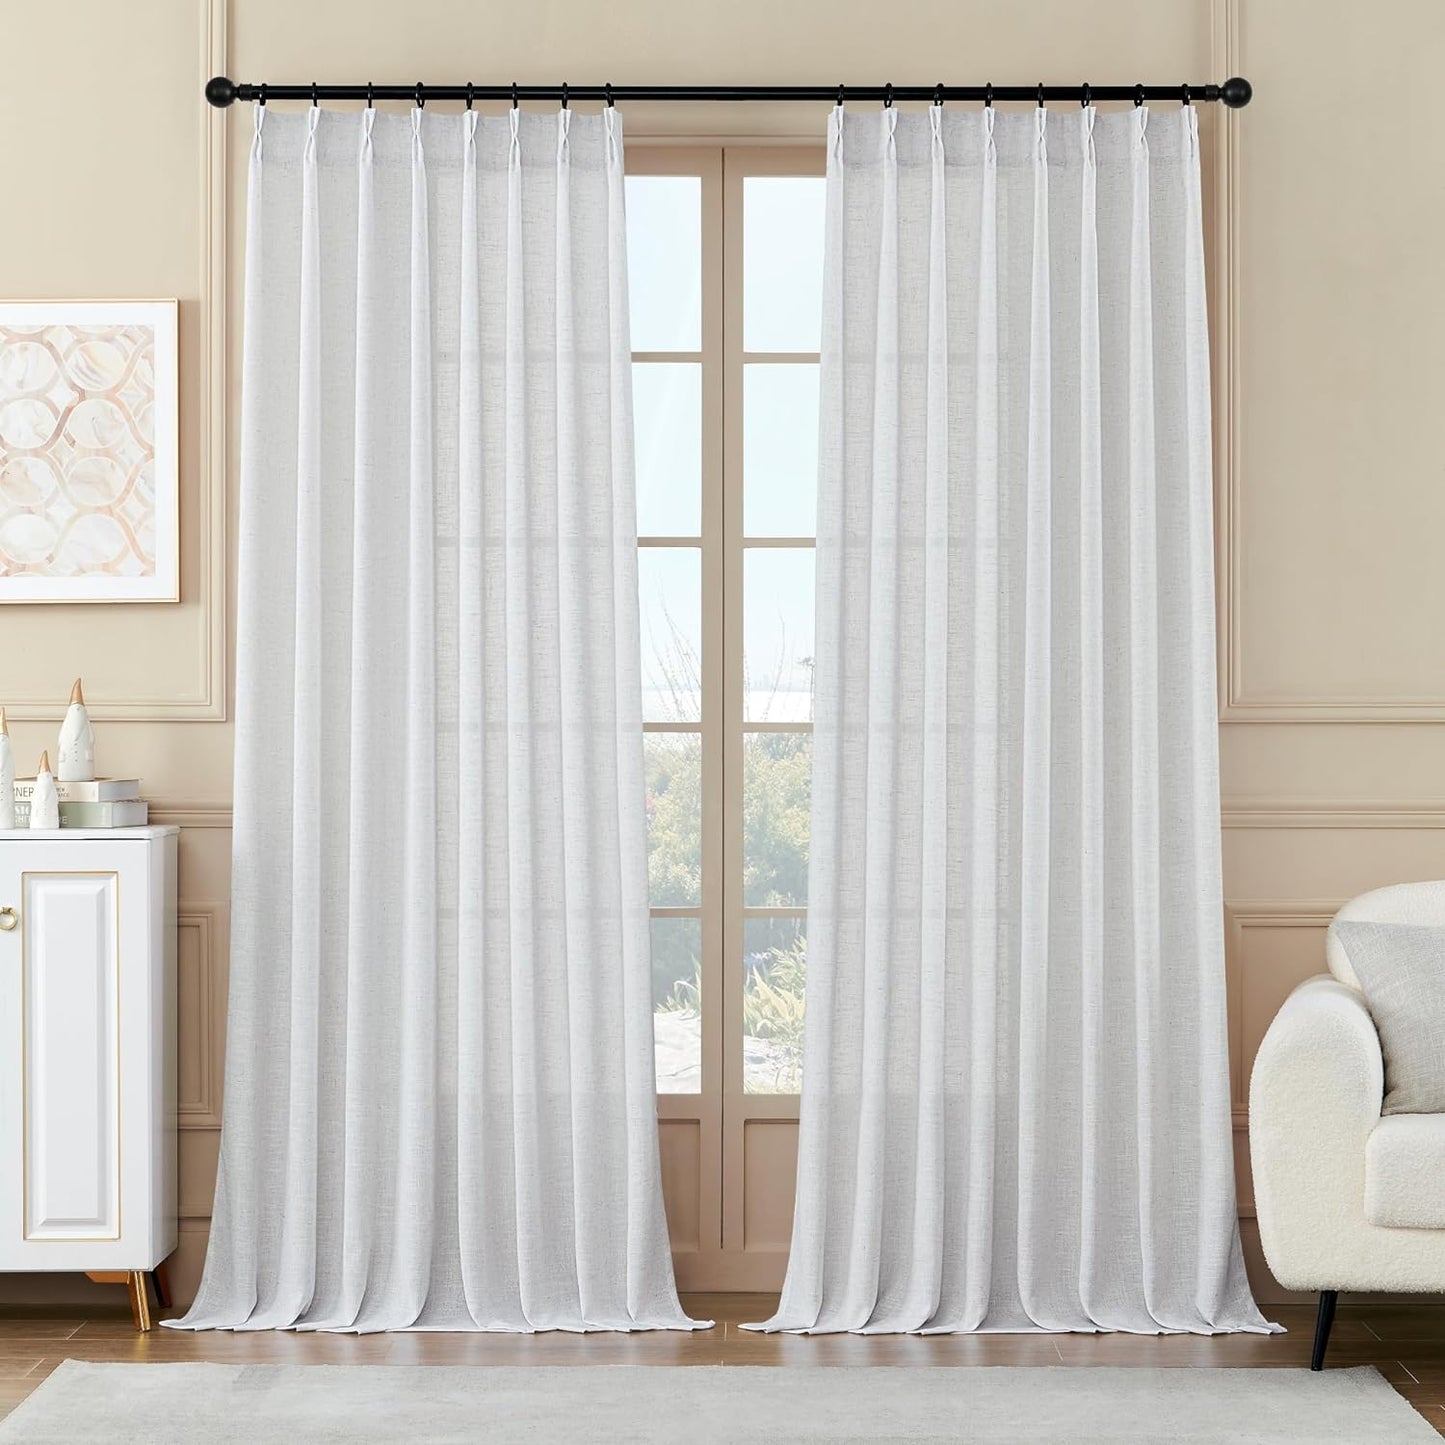 MASWOND White Pinch Pleated Curtains 90 Inches Long 2 Panels for Living Room Semi Sheer Linen Curtains Pinch Pleat Drapes for Traverse Rod Light Filtering Curtains for Dining Bedroom W38Xl90 Length  MASWOND White 50X108 